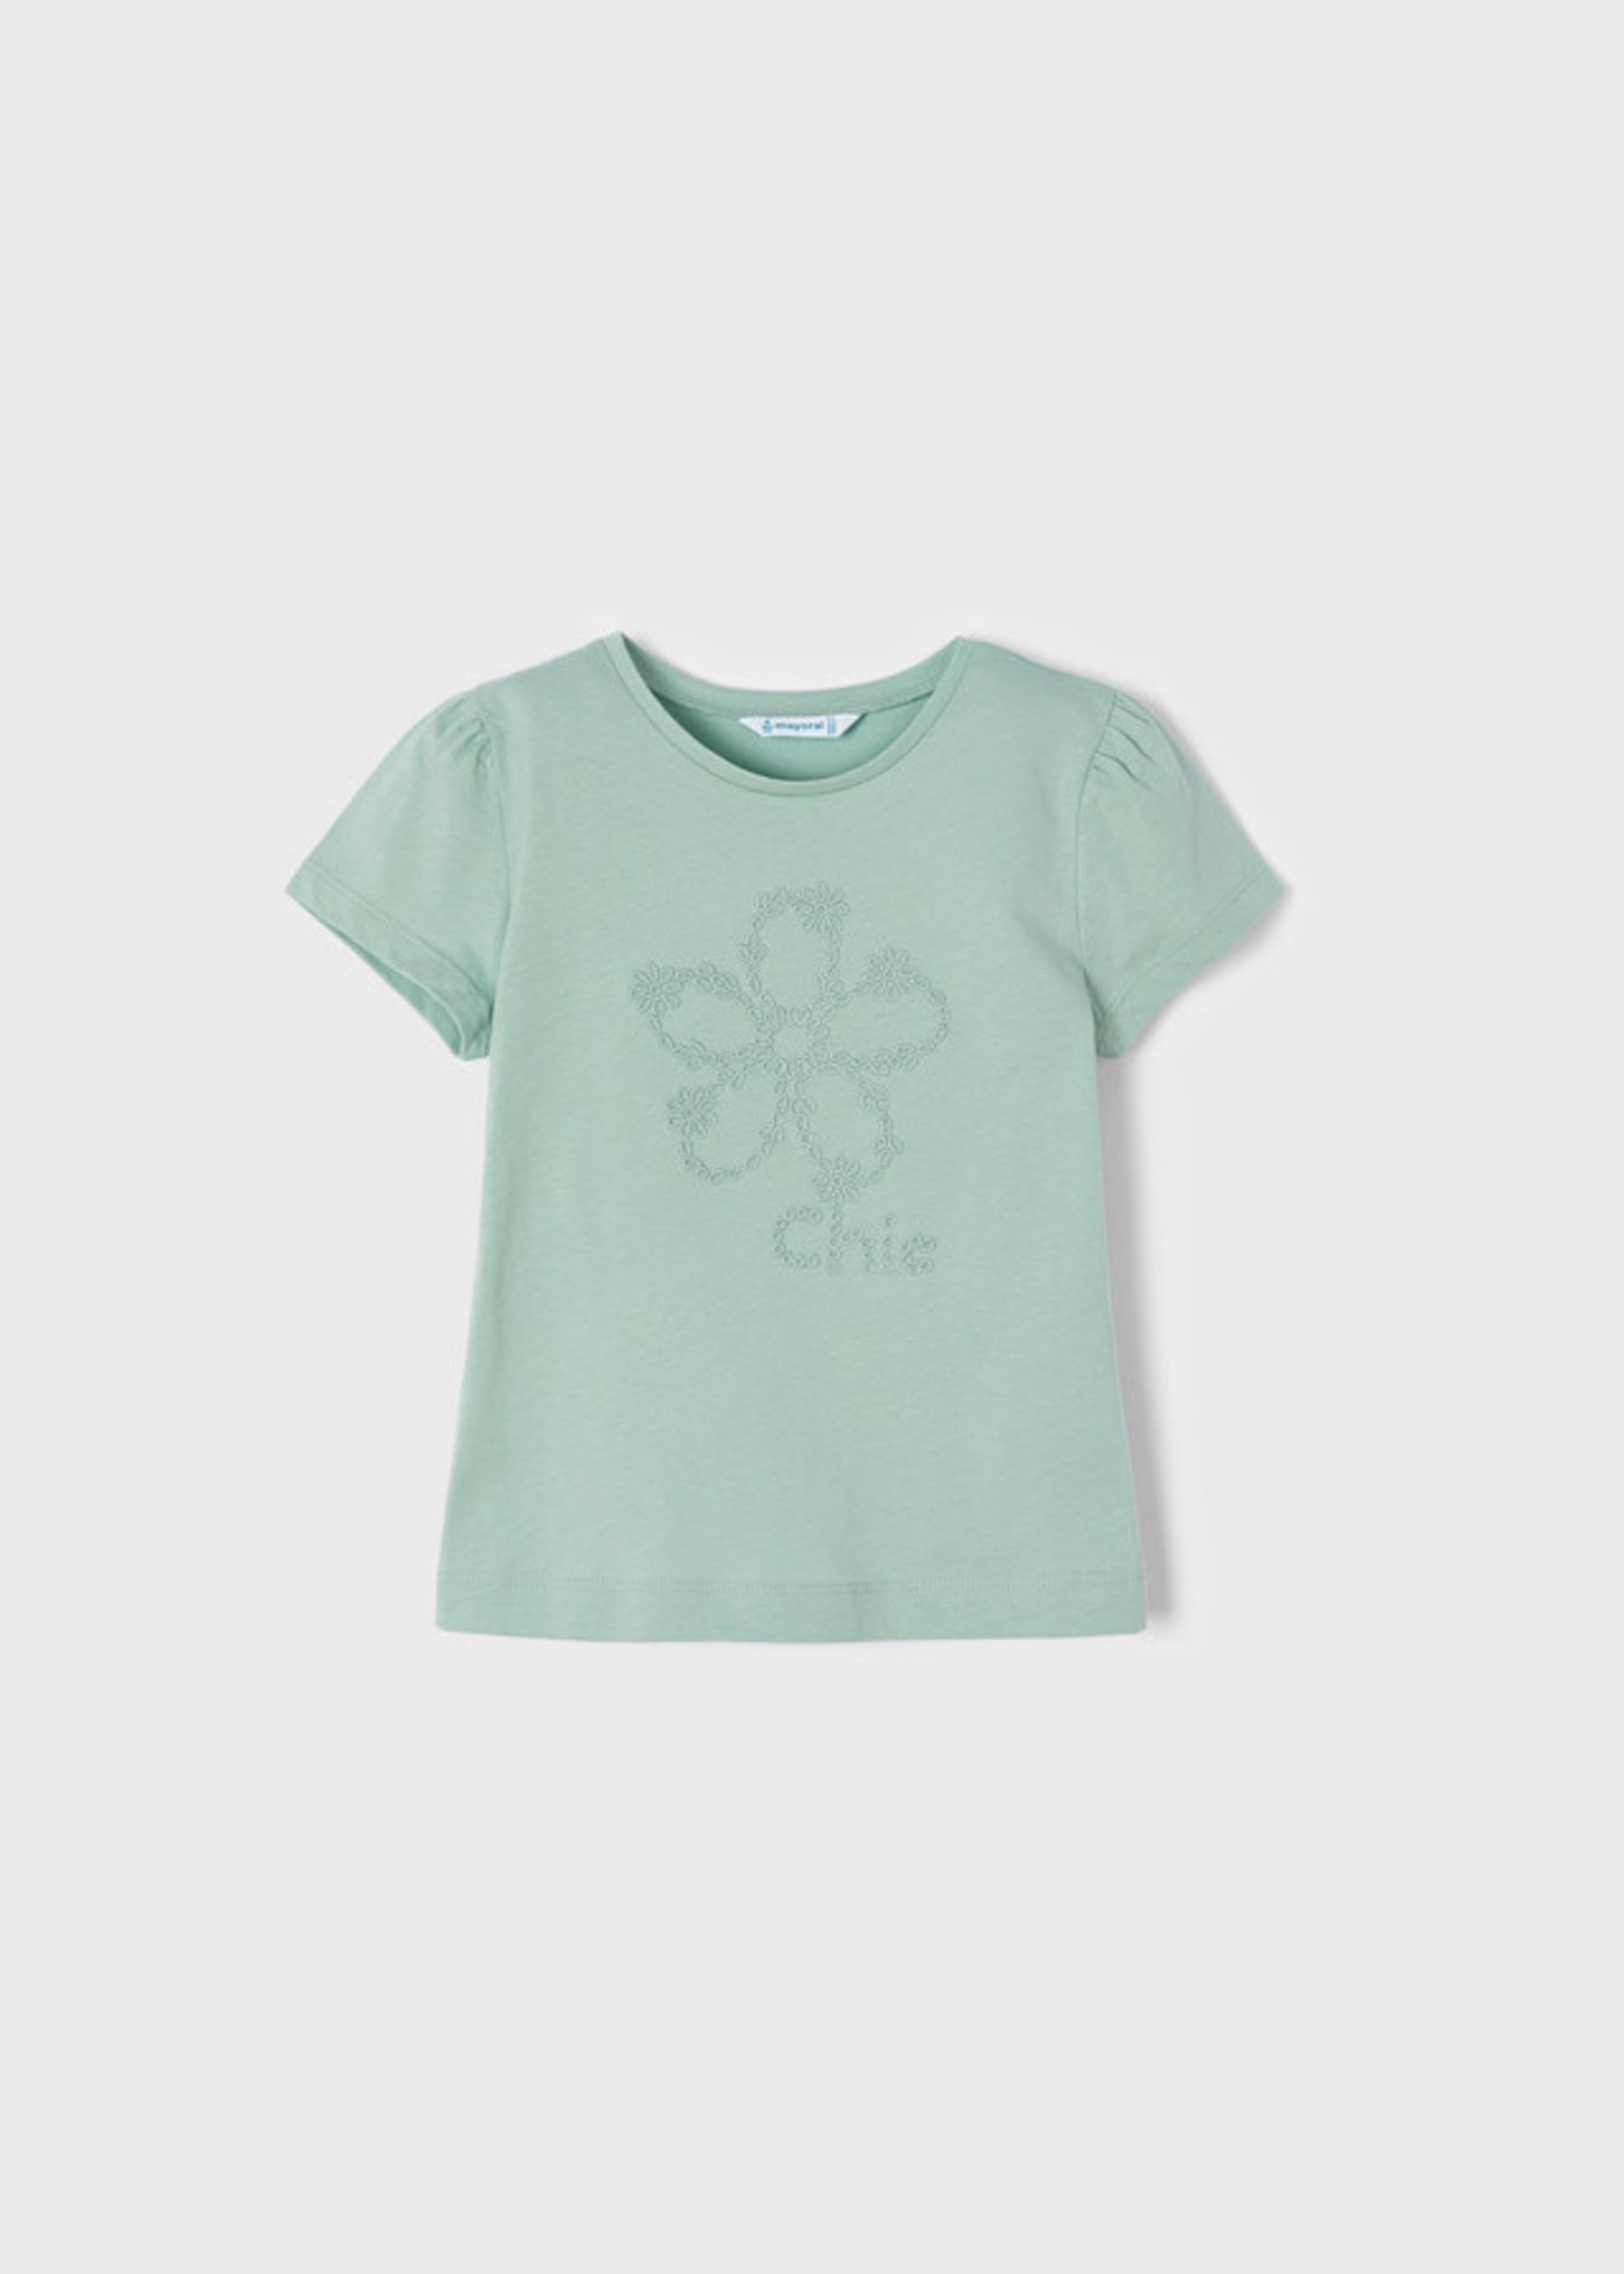 Mayoral Mayoral S/s bow t-shirt green- 22 03041